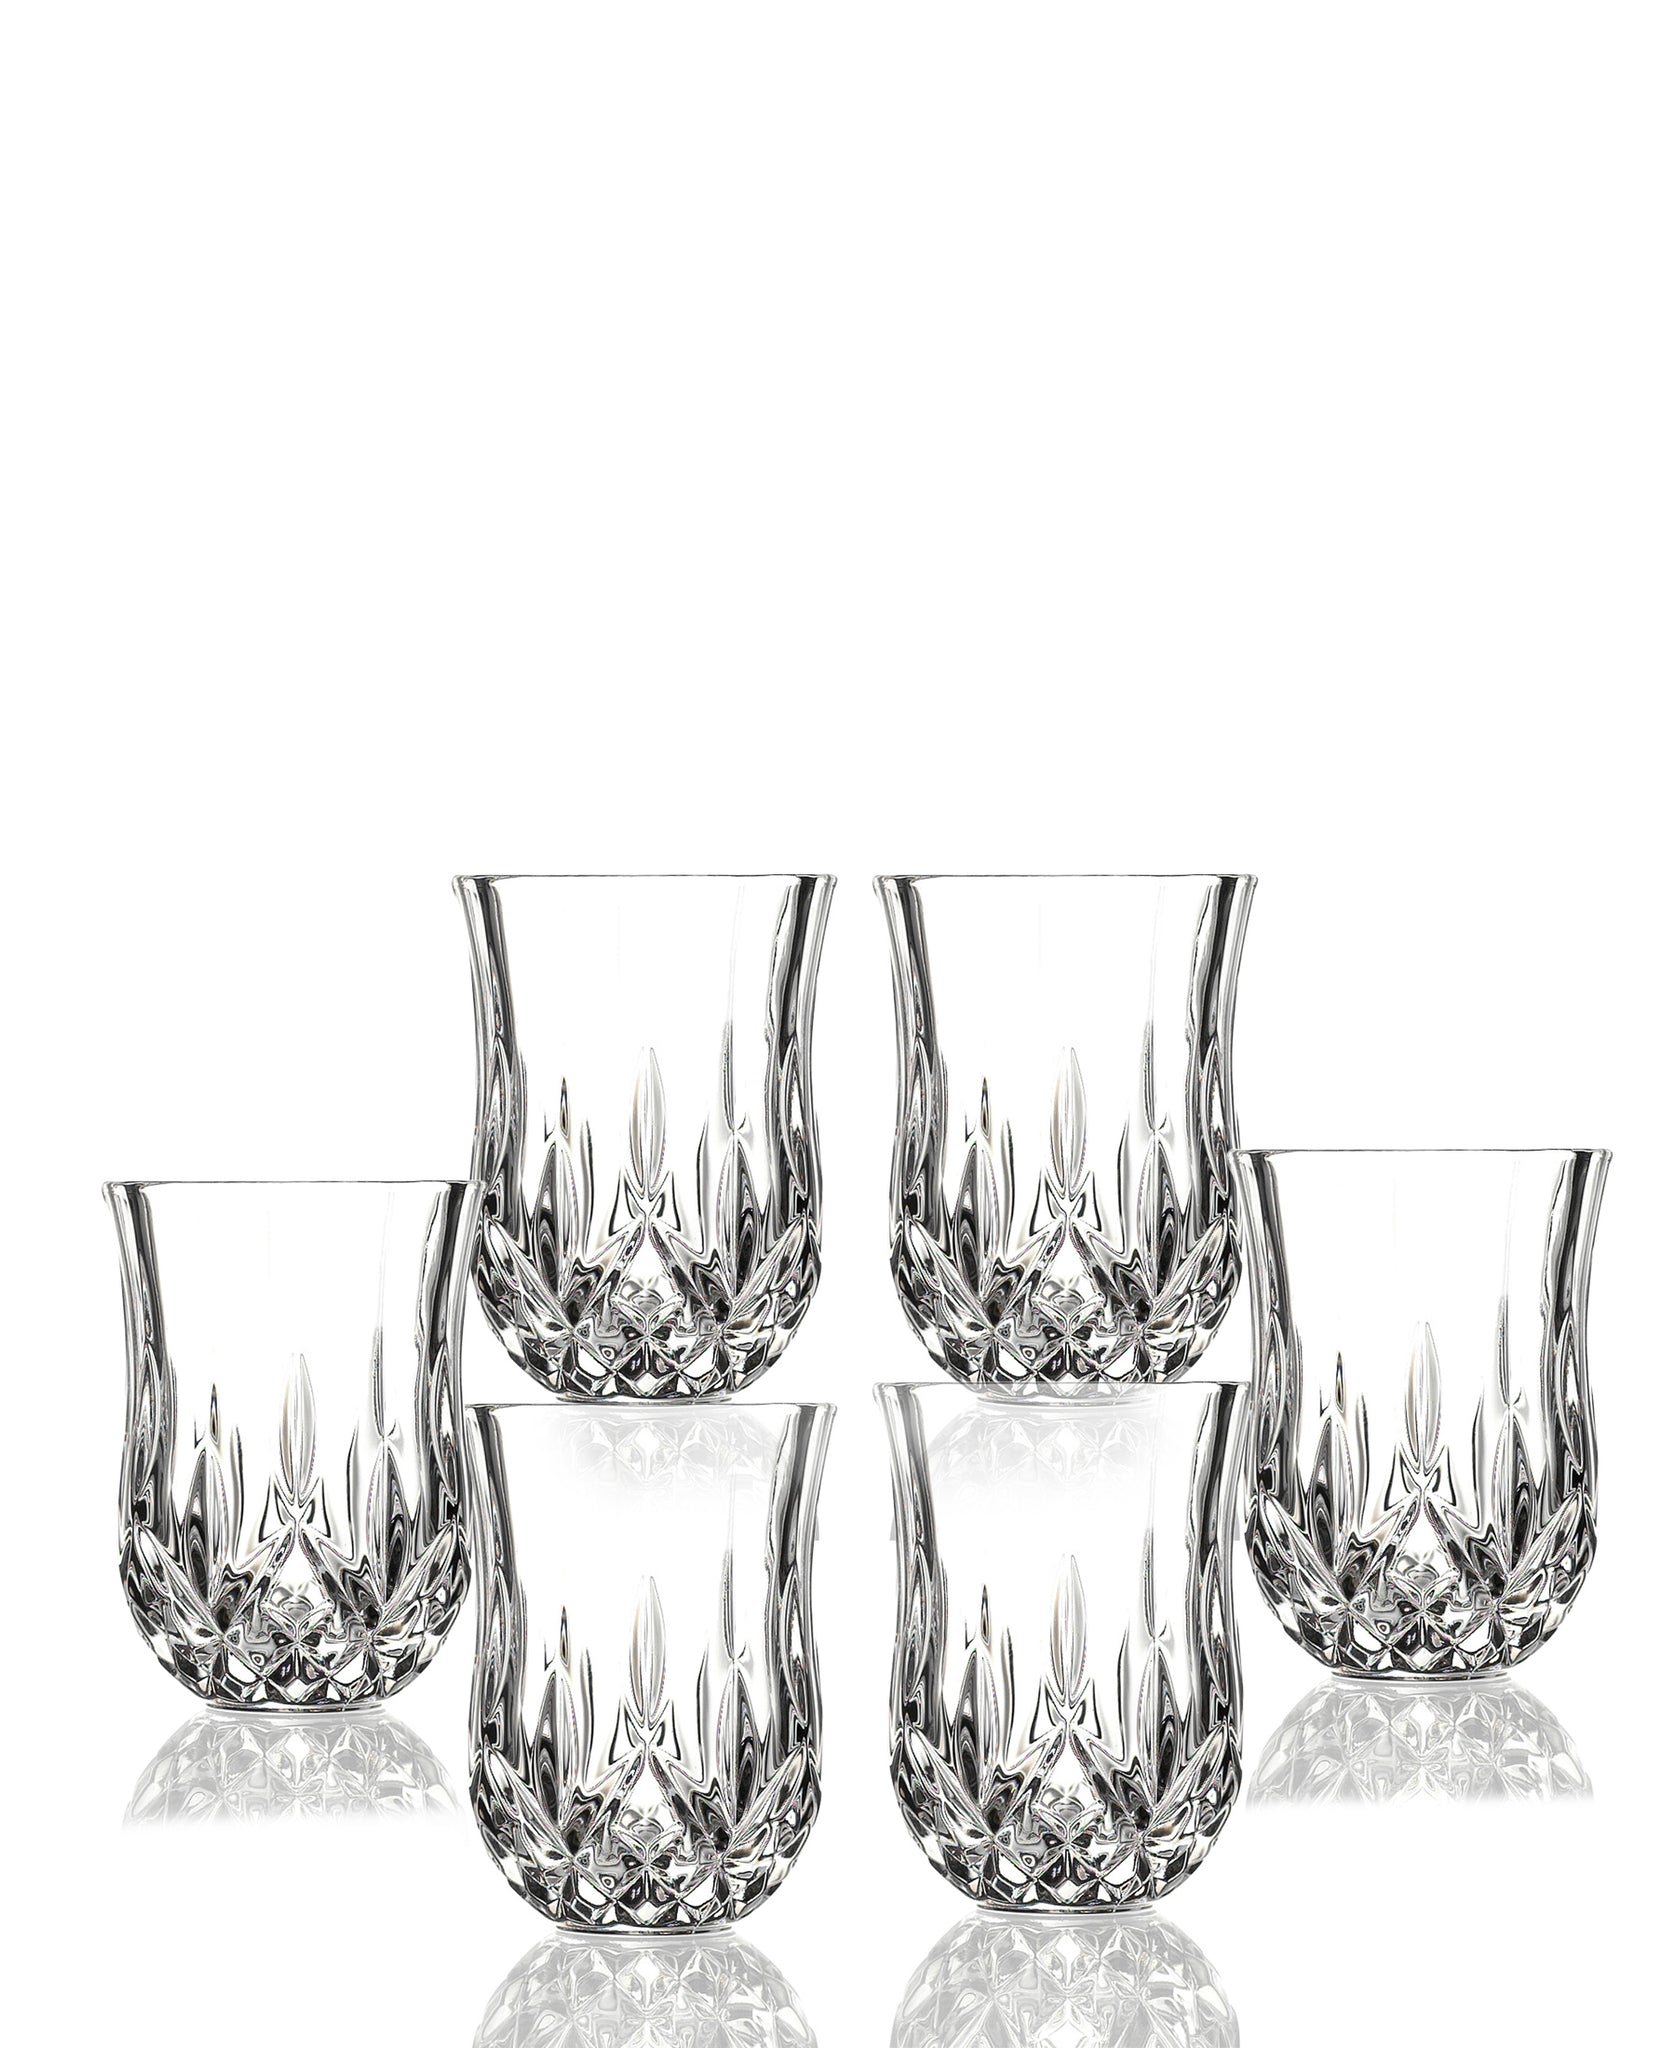 RCR Opera Whisky Glasses Set of 6 And Decanter - Clear